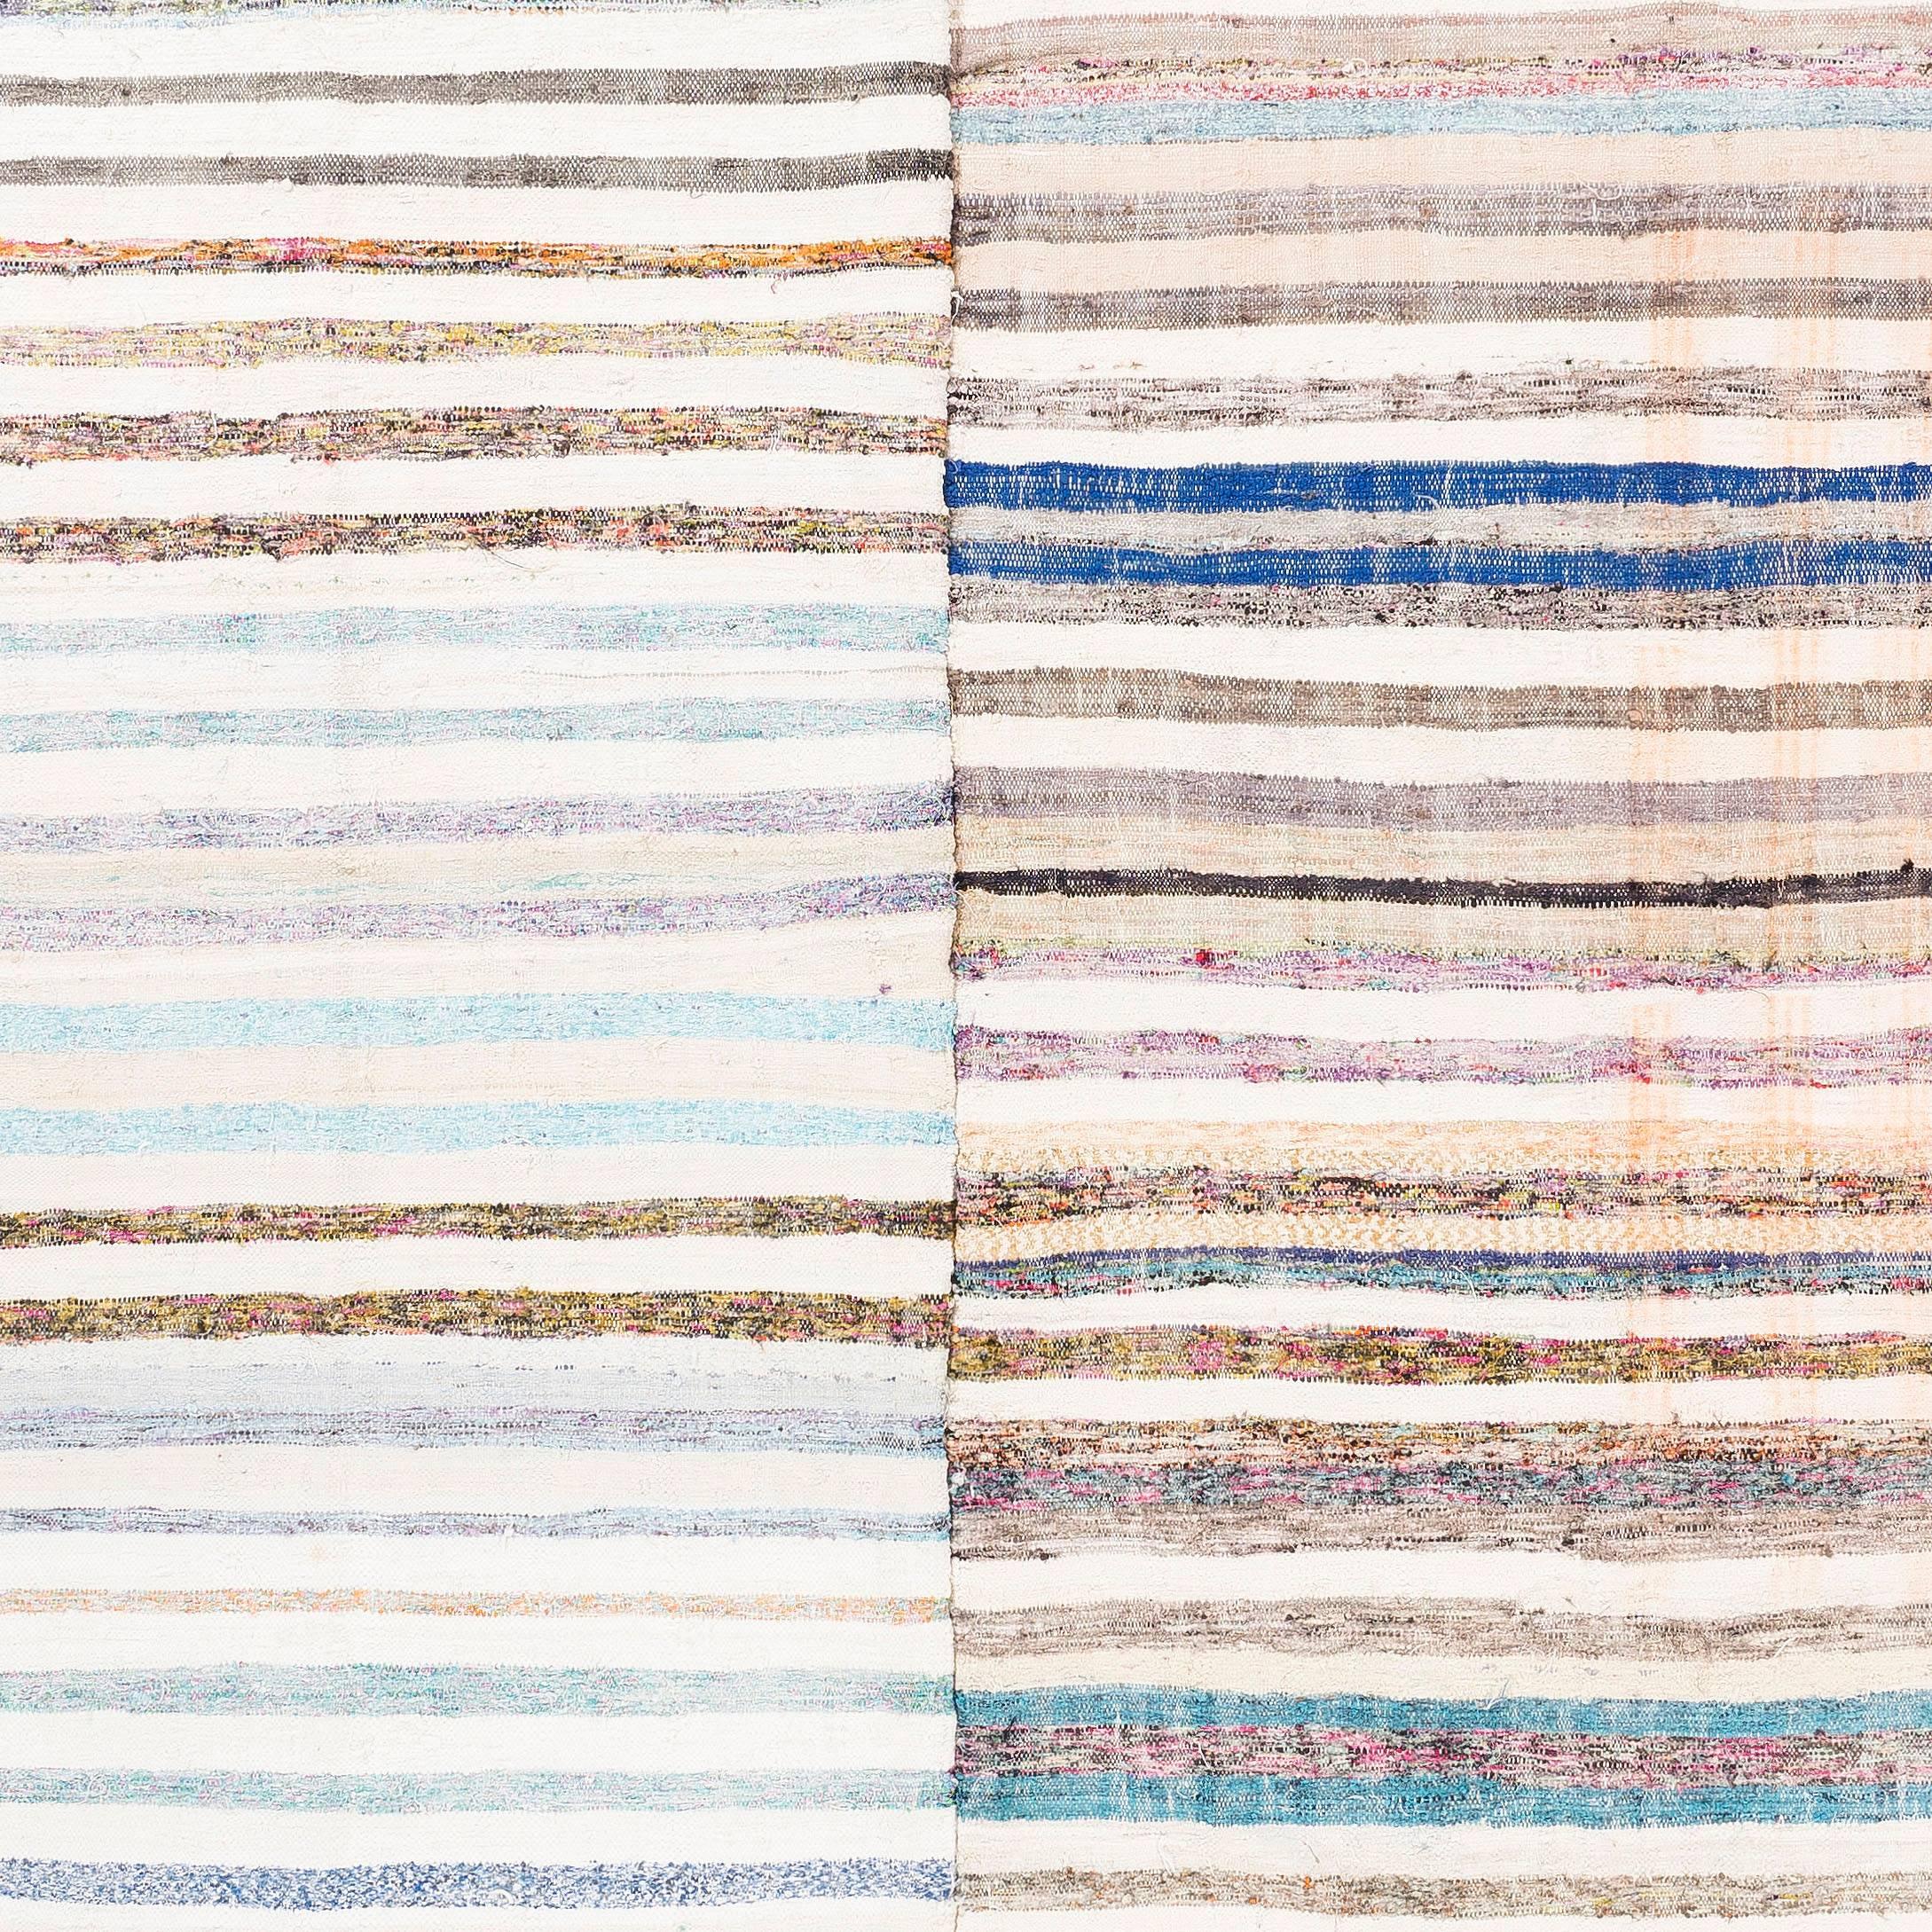 Hand-Woven Striped Vintage Cotton Kilim in Soft Colors